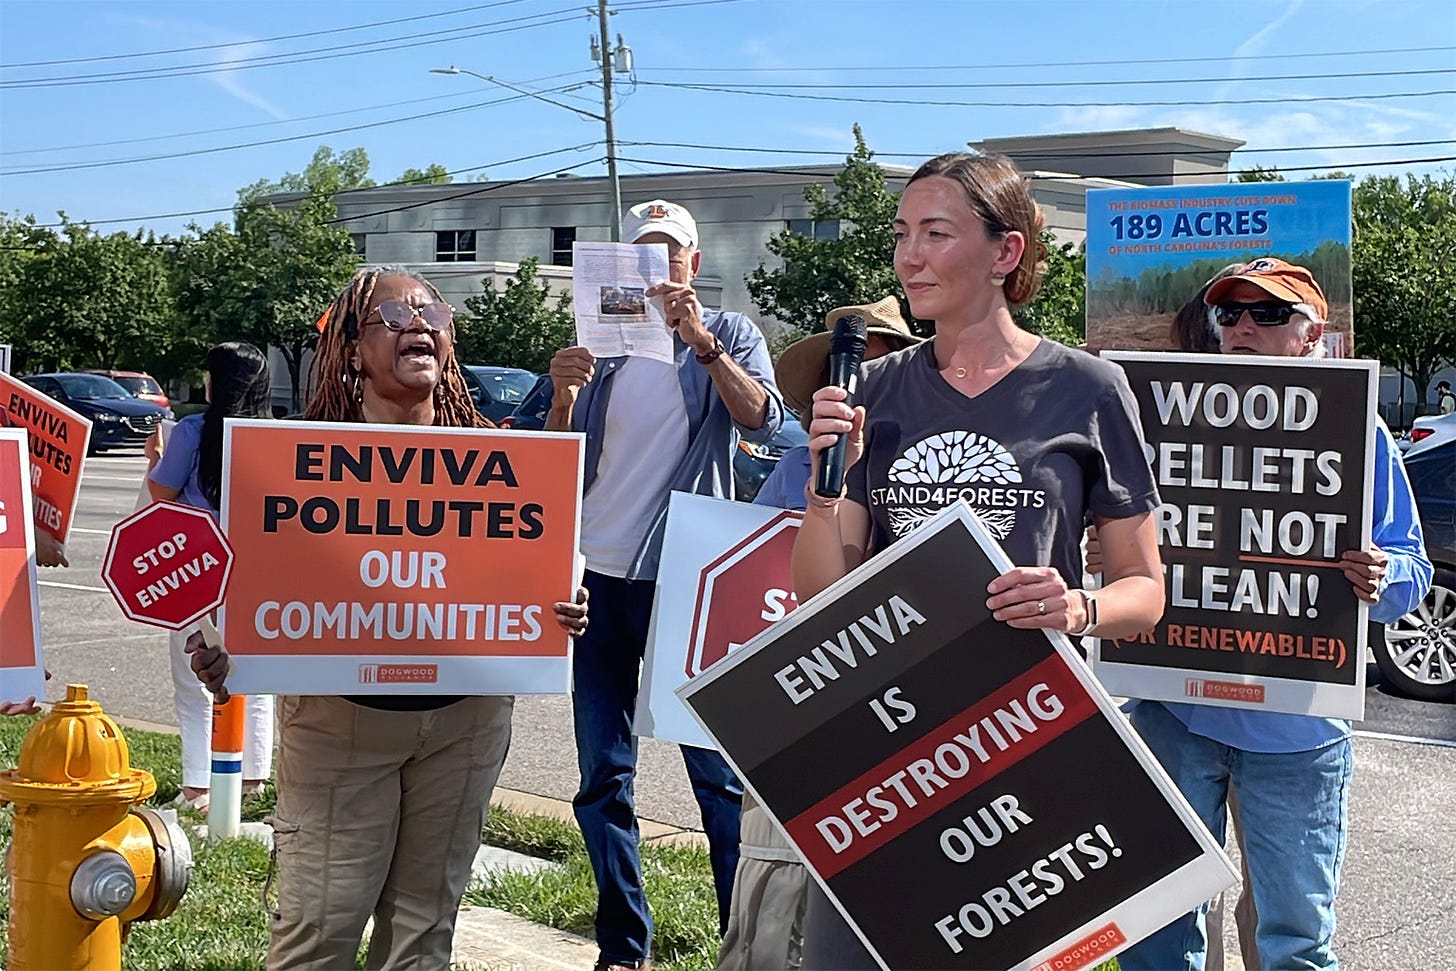 Forest biomass protestors outside Enviva's Raleigh, North Carolina, offices. 